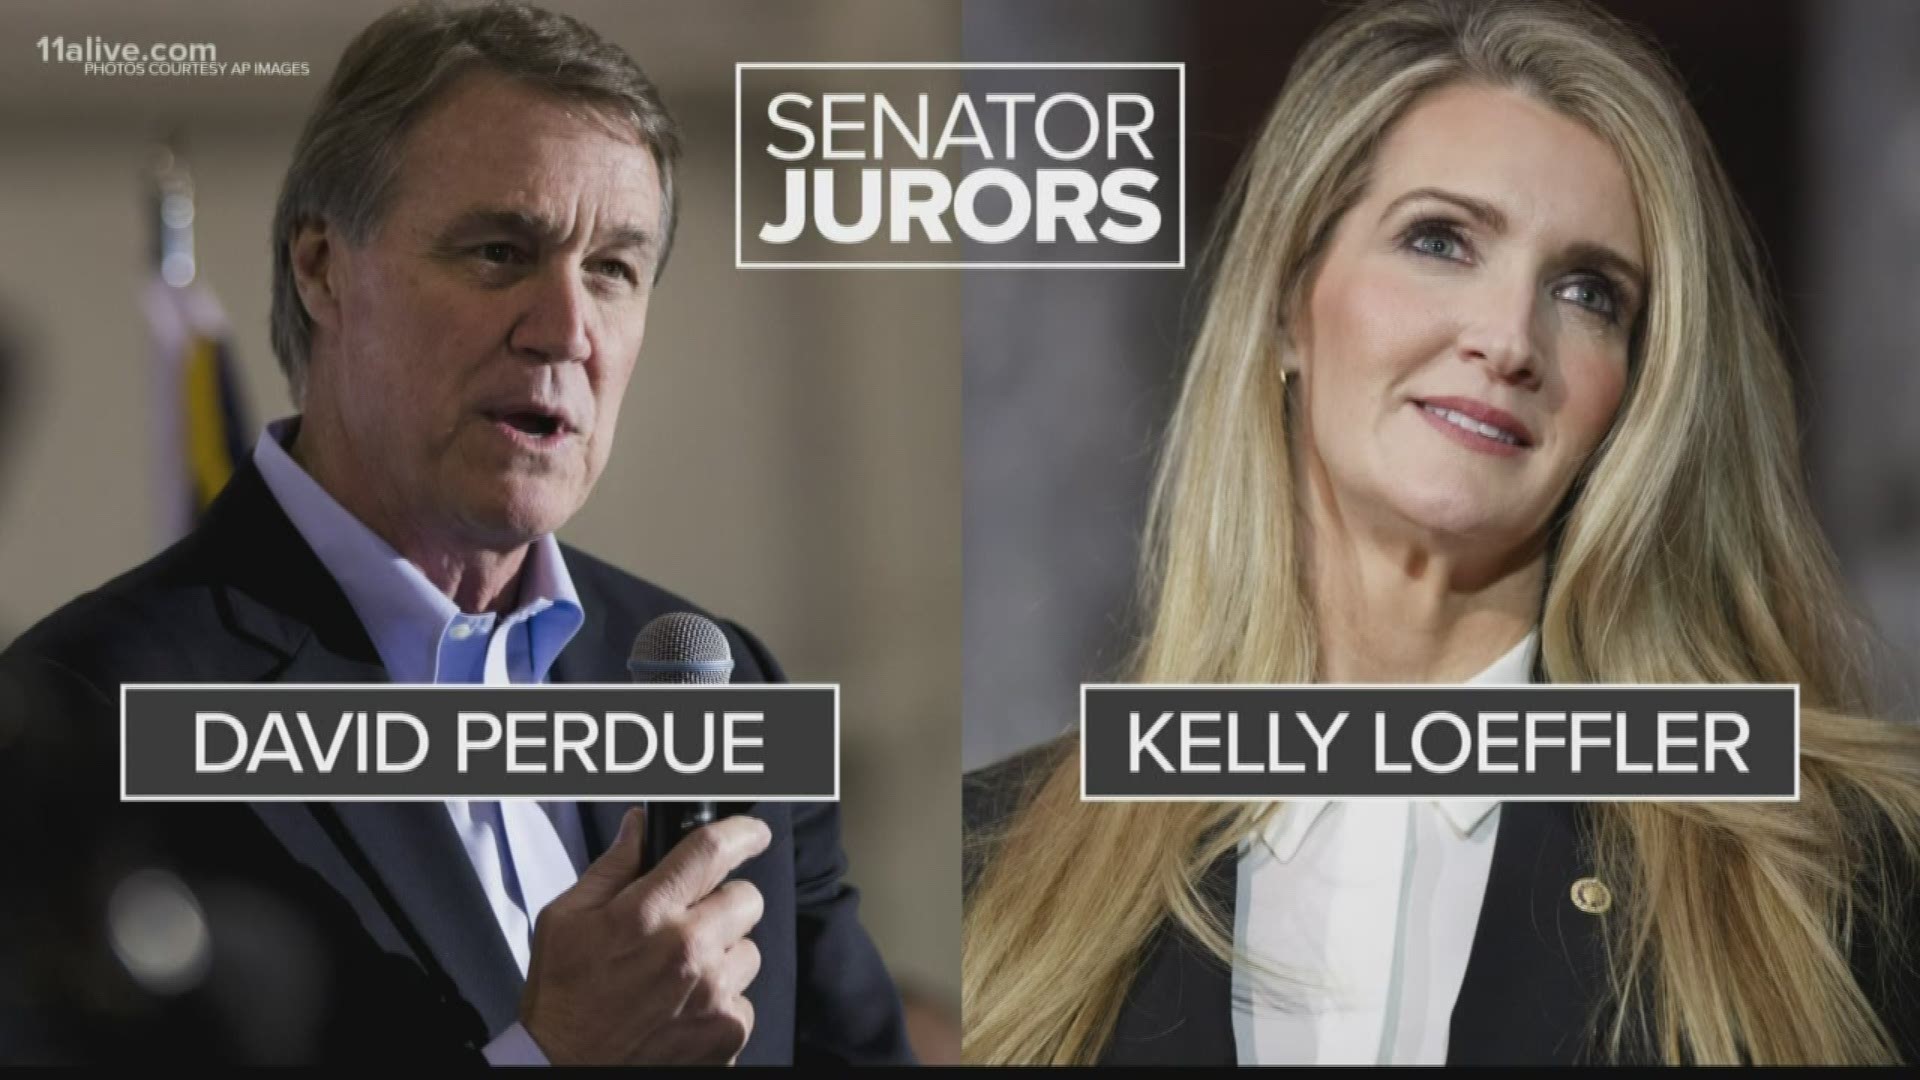 Georgia Senators David Perdue and Kelly Loeffler will be playing a silent role now that the Senate Impeachment trial has begun.